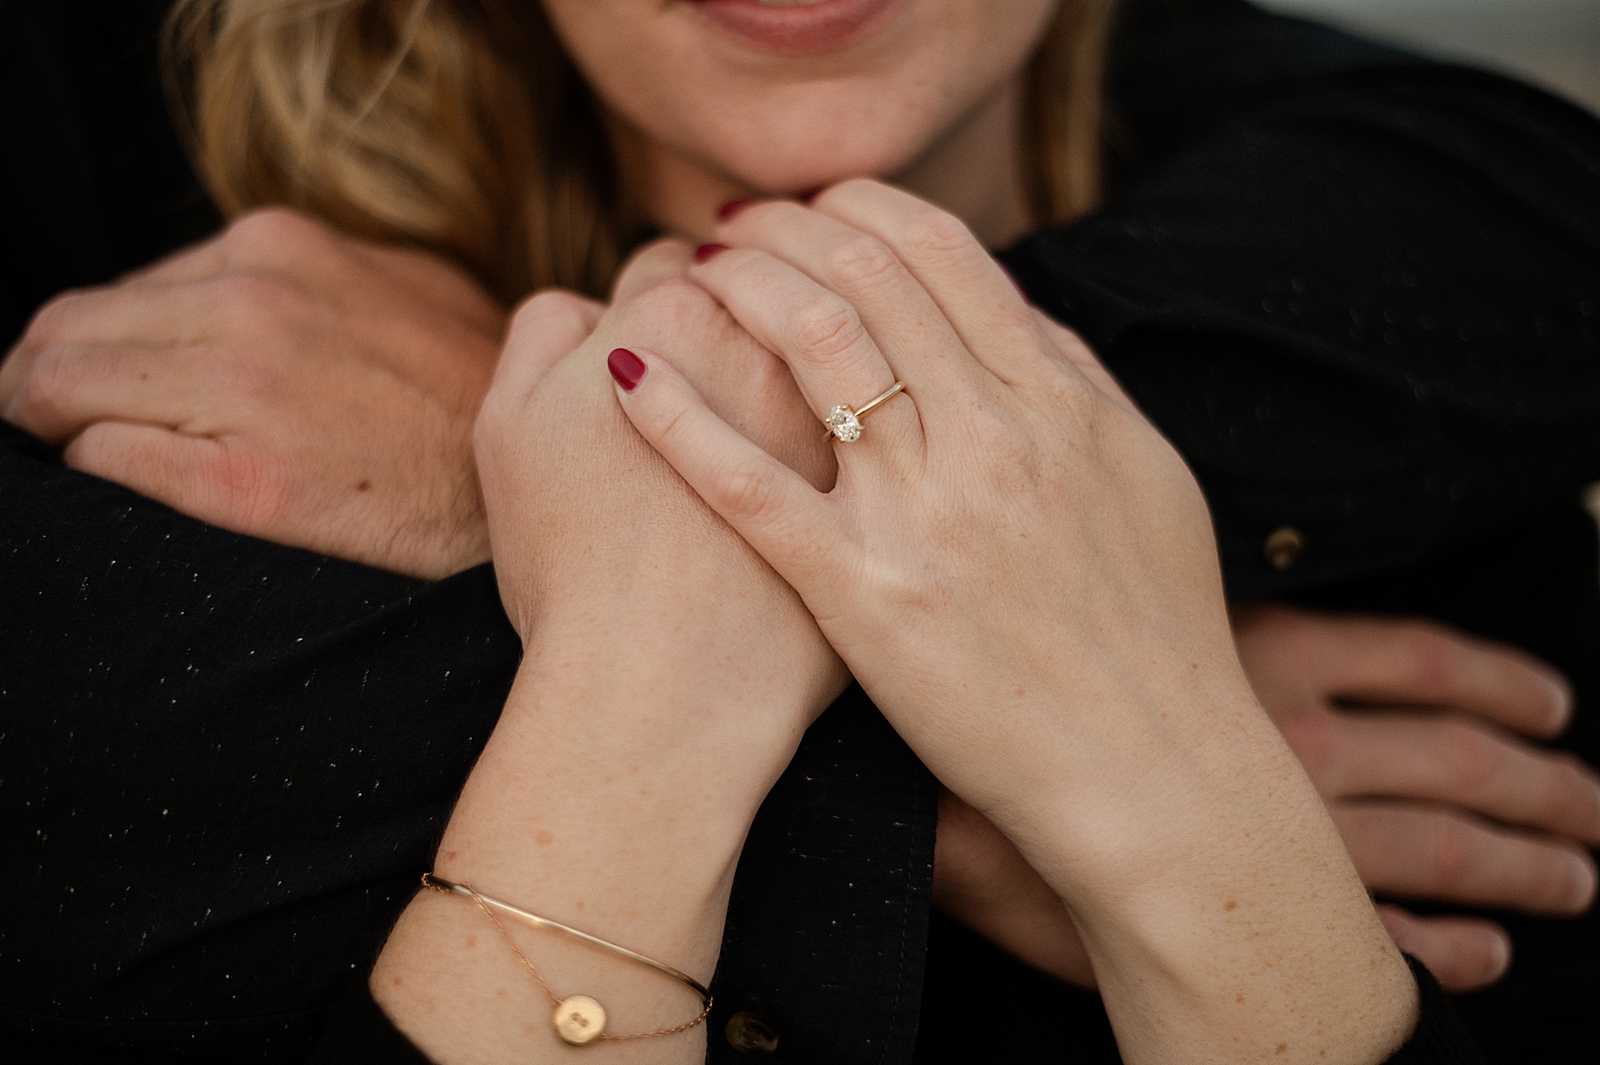 Closeup of man's arms wrapped around woman and showing off engagement ring